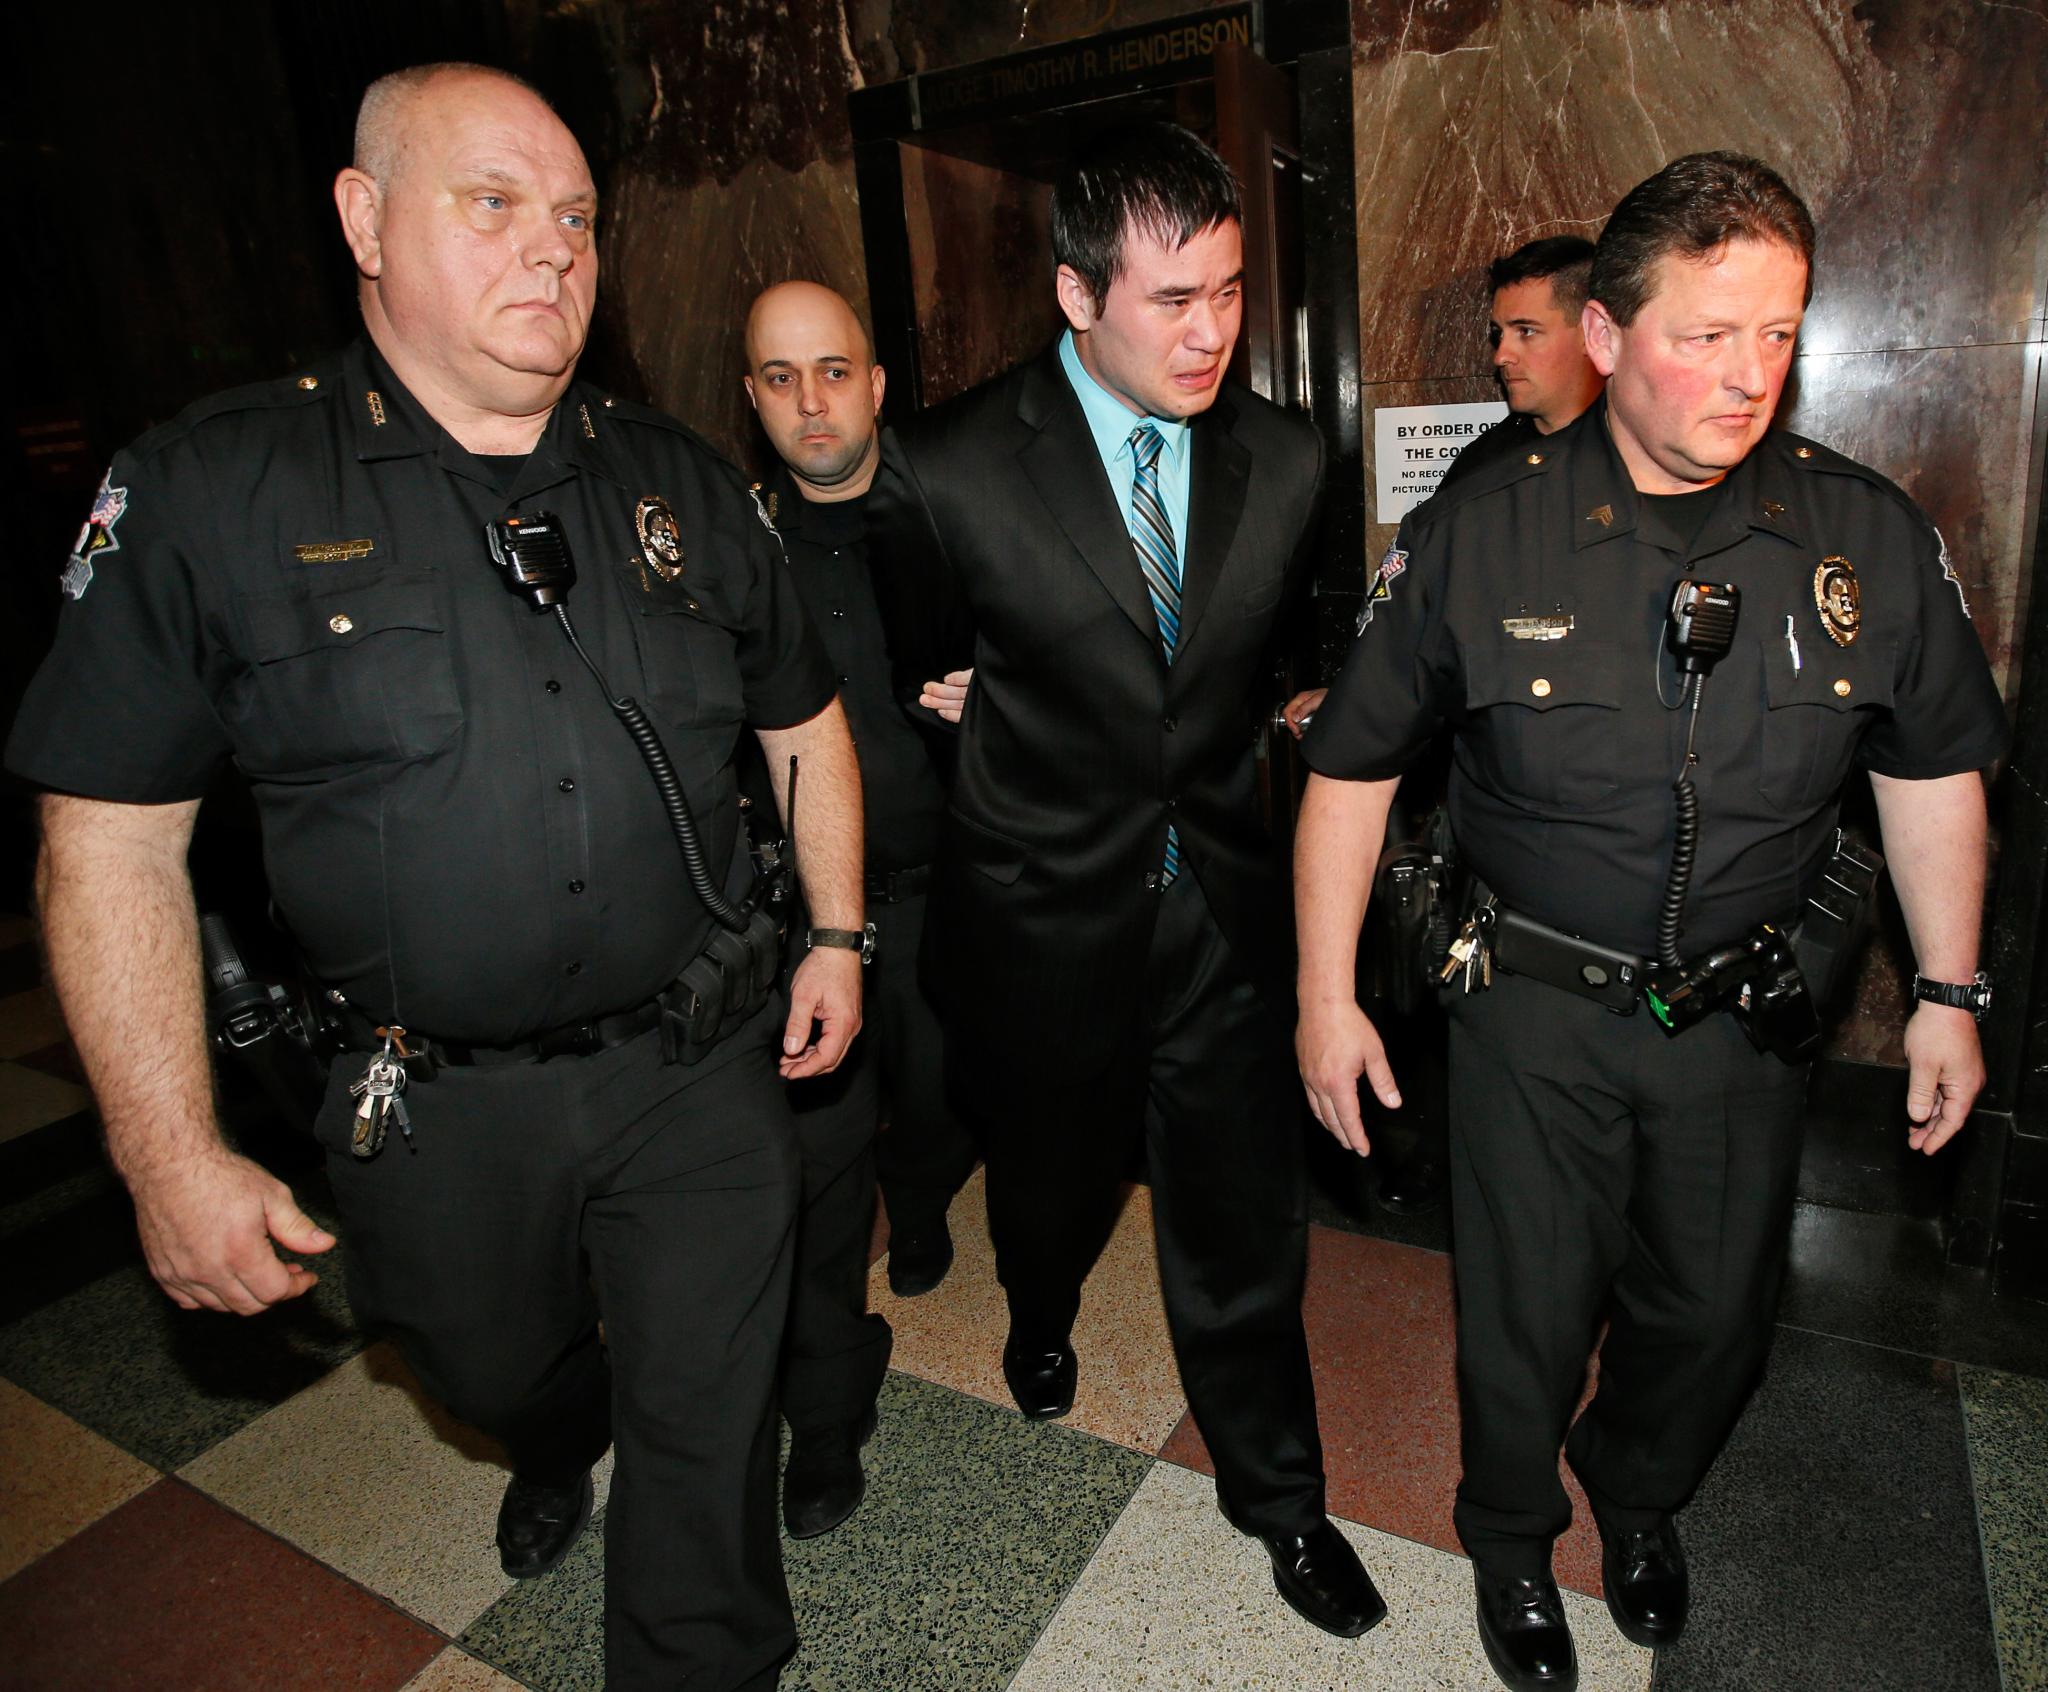 Women Assaulted by Daniel Holtzclaw Move Forward With Civil Lawsuit